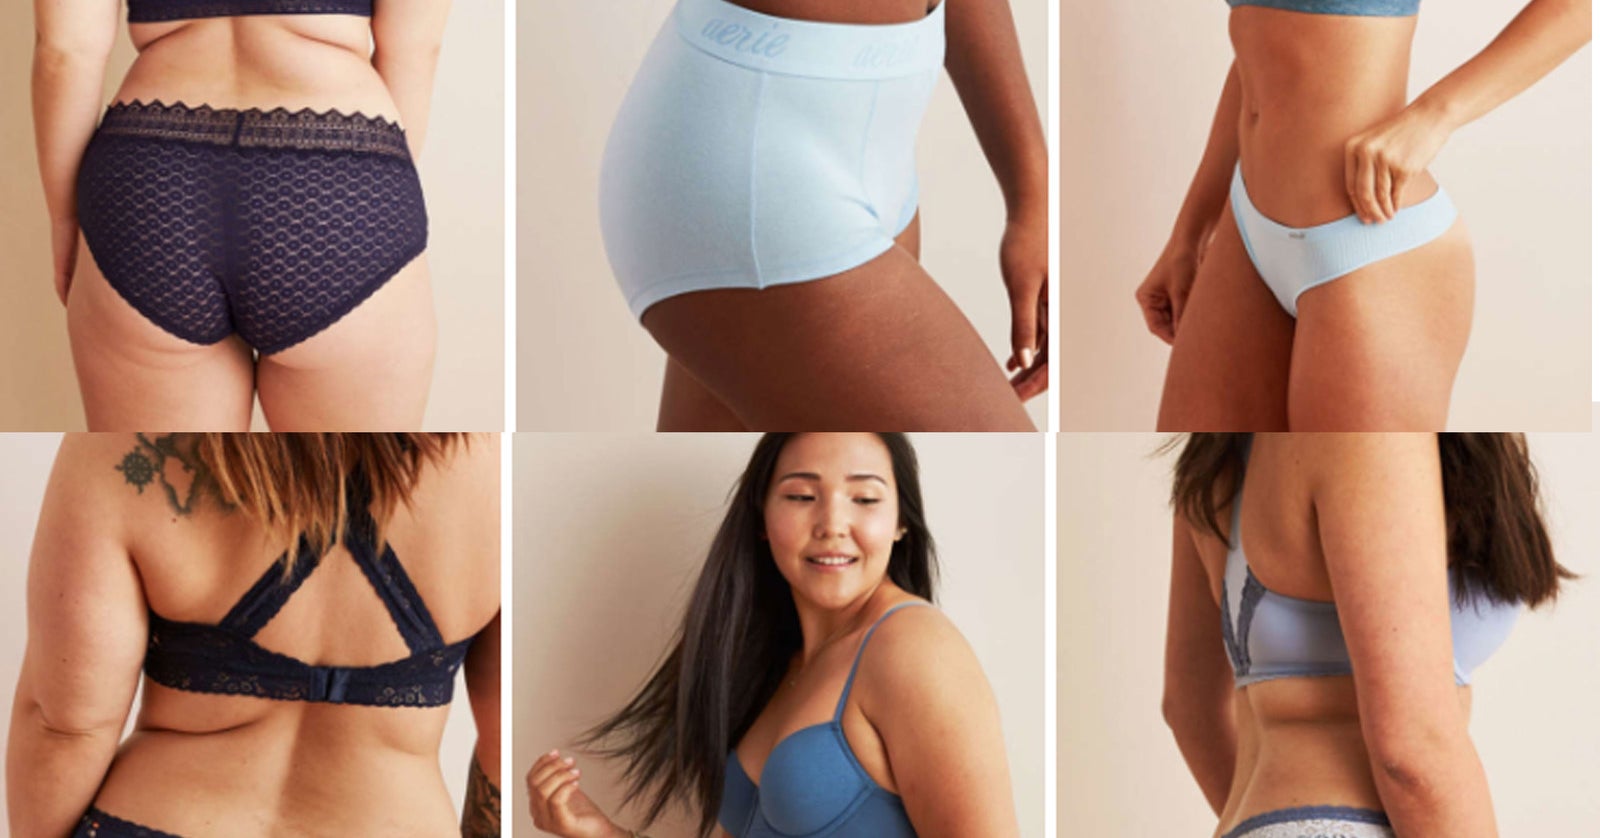 Aerie Gets Real With Underwear Campaign Featuring Unretouched Male Models